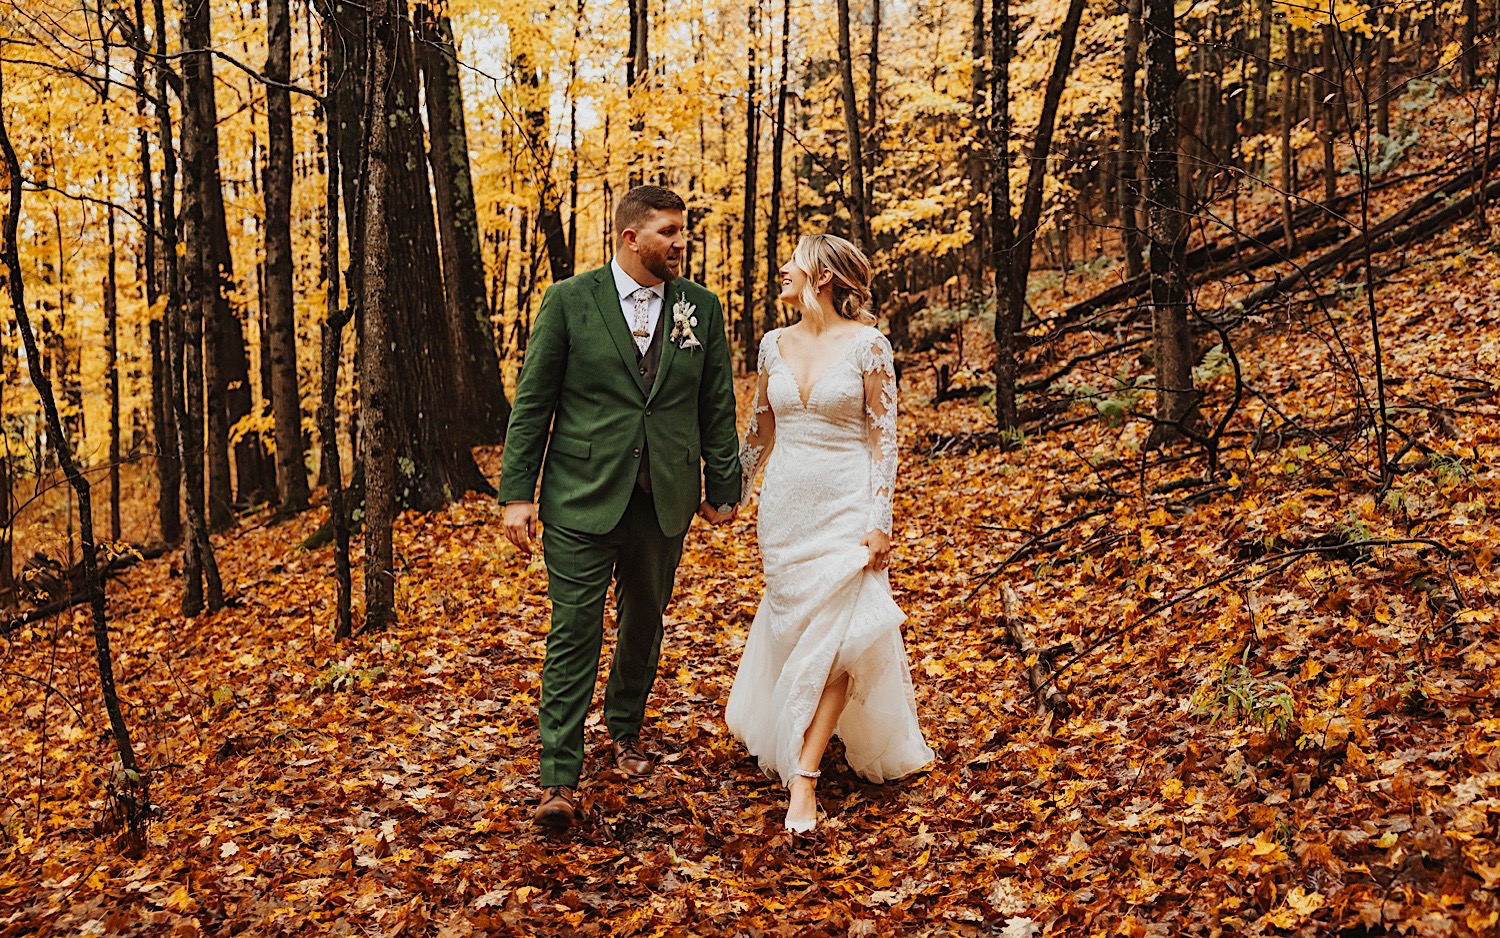 A bride and groom walk through a leaf covered forest in the fall for portraits during their wedding at Lake Bomoseen Lodge in Vermont